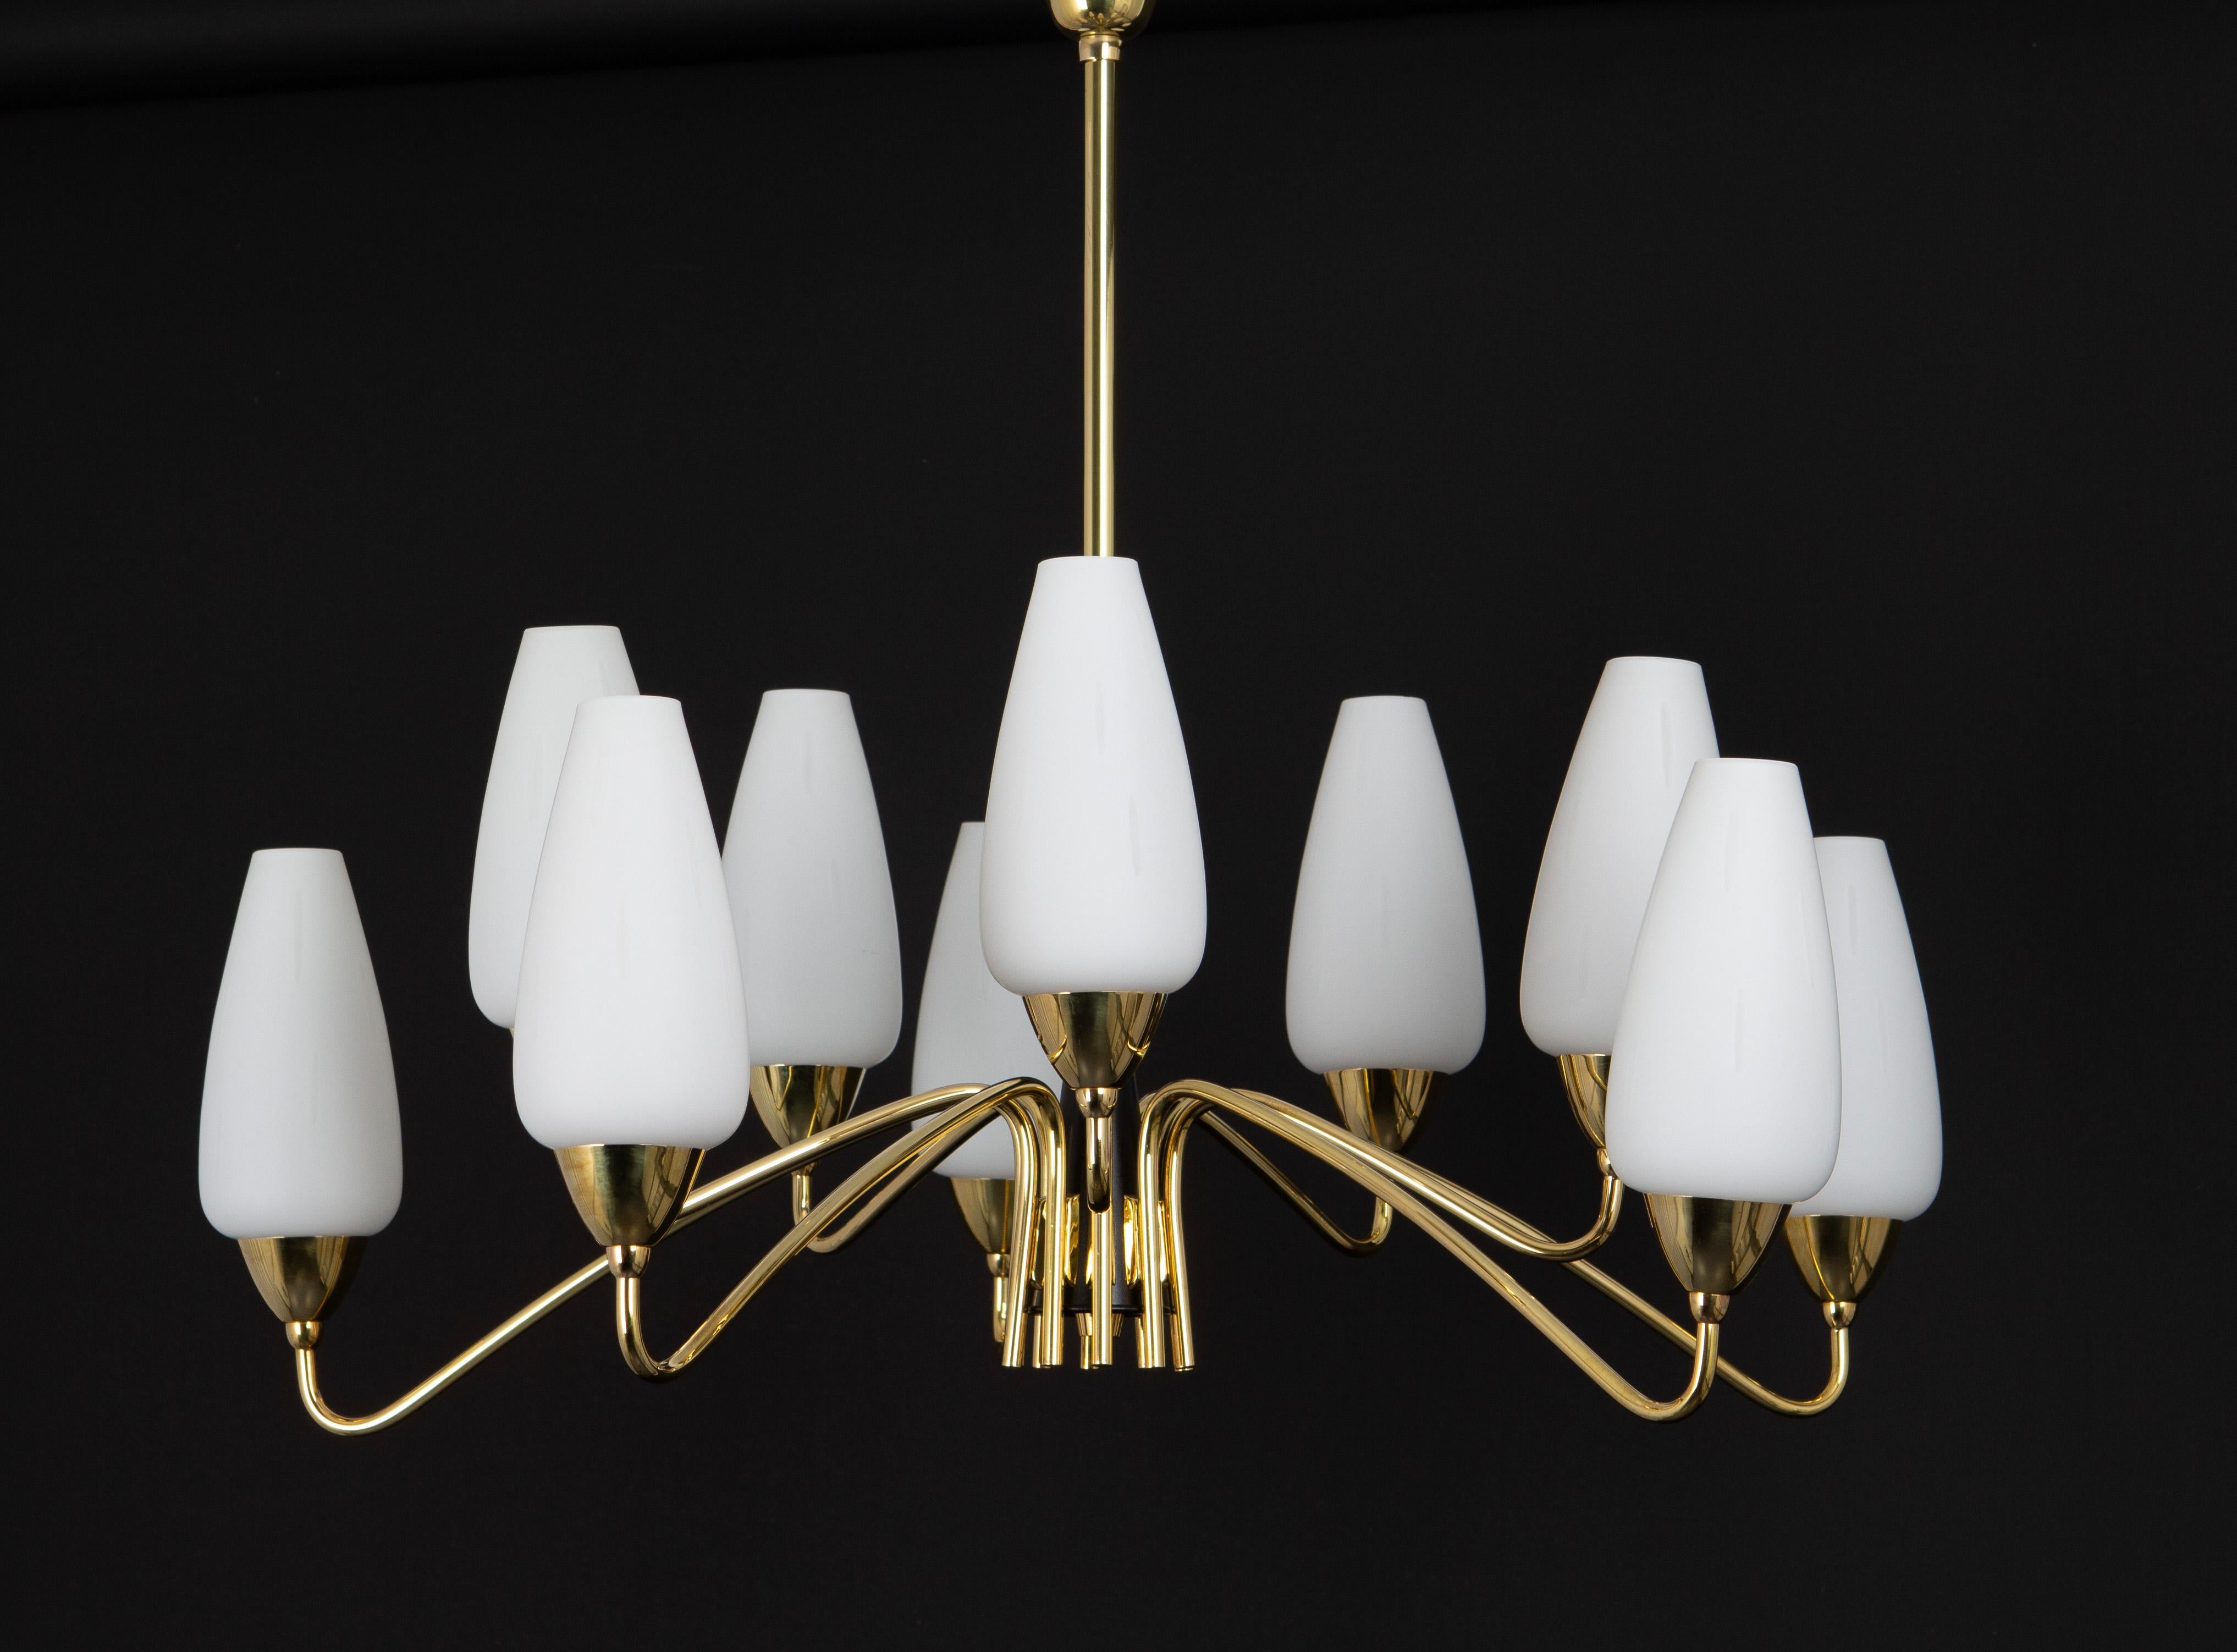 A stunning ten-light chandelier in the manner of Stilnovo, Germany, manufactured in circa 1950-1959. A handmade and high-quality piece.

High quality and in very good condition. Cleaned, well-wired and ready to use. 

The fixture requires 10 x E14